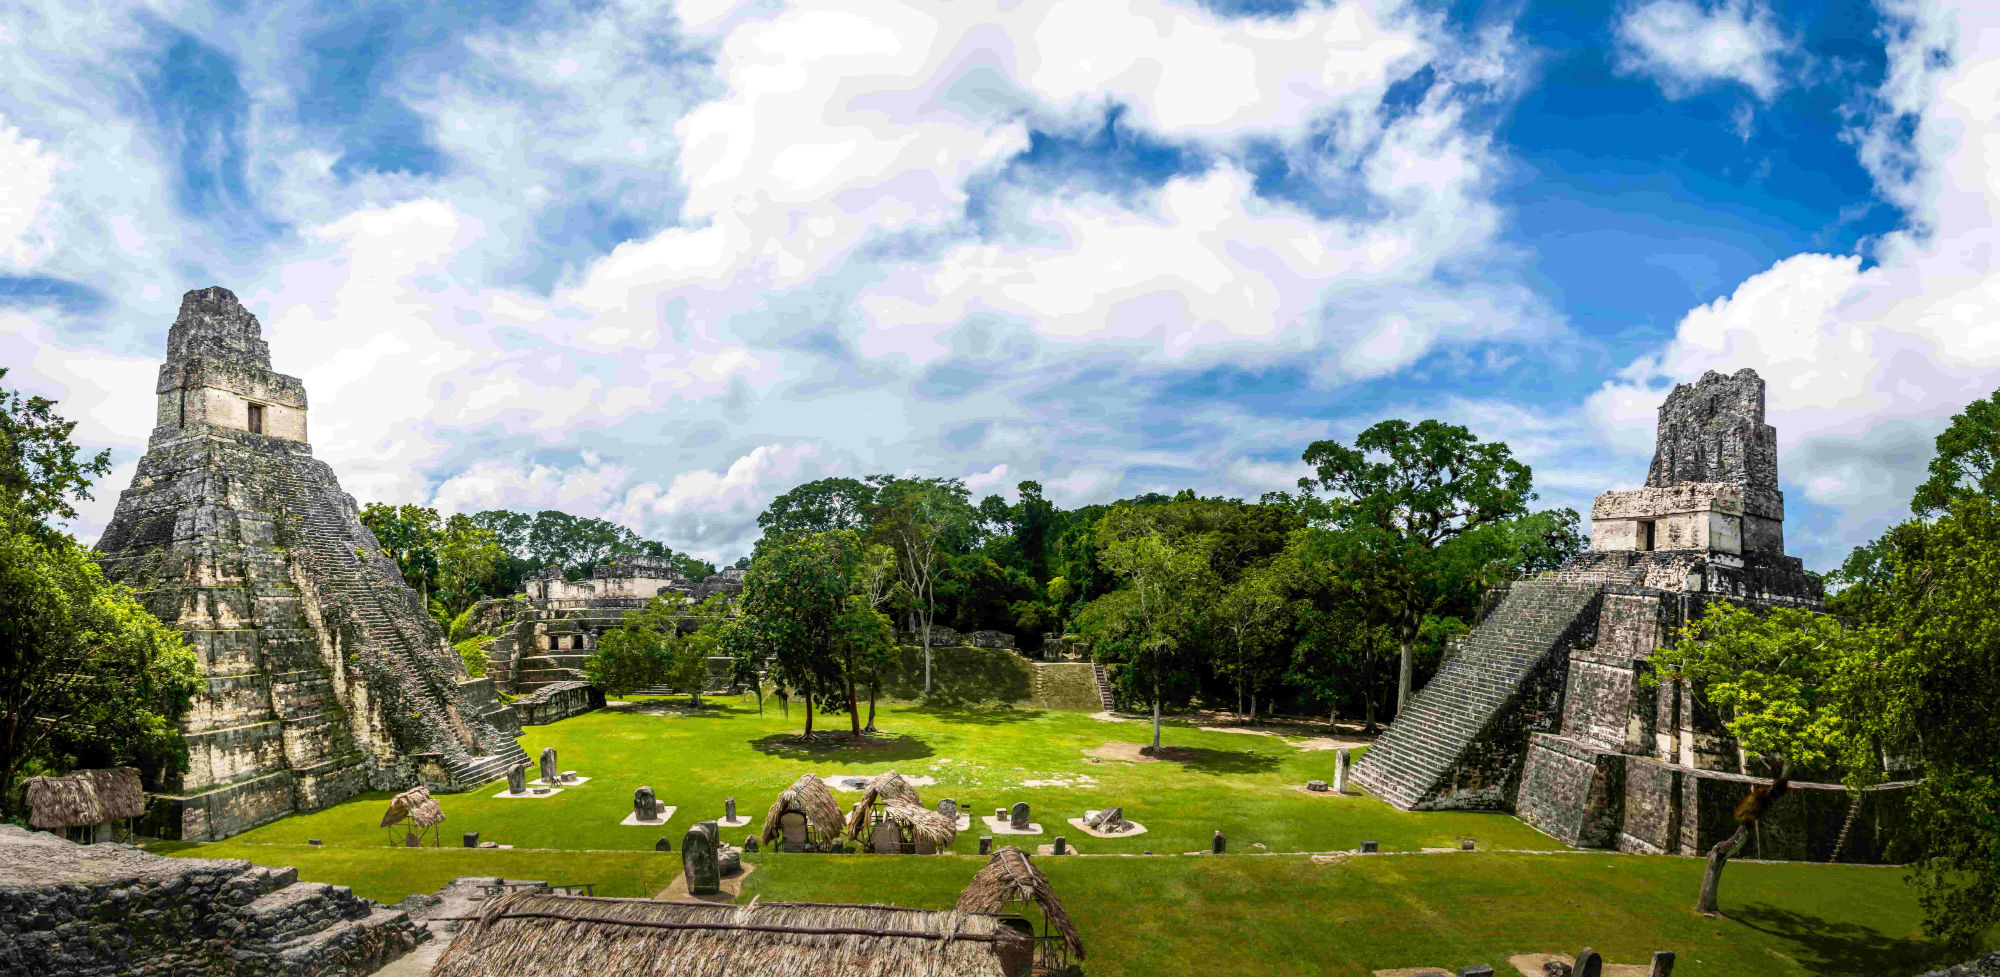 A bit of history about the Mayan kingdom of Tikal